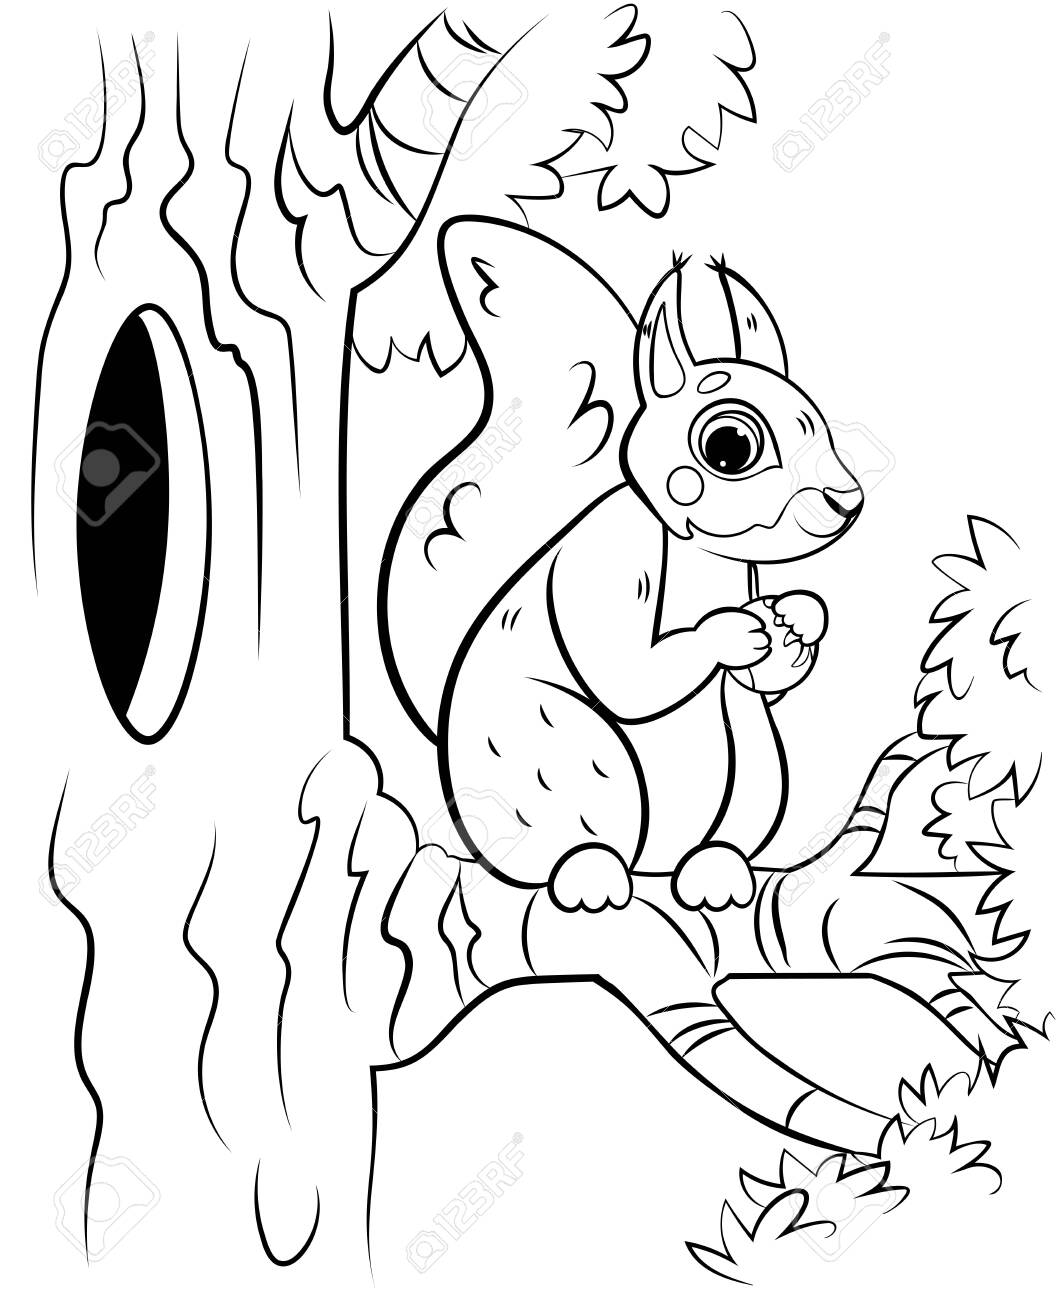 Printable coloring page outline of cute cartoon squirrel on tree with hazelnut vector image with forest background coloring book of forest wild animals for kids royalty free svg cliparts vectors and stock